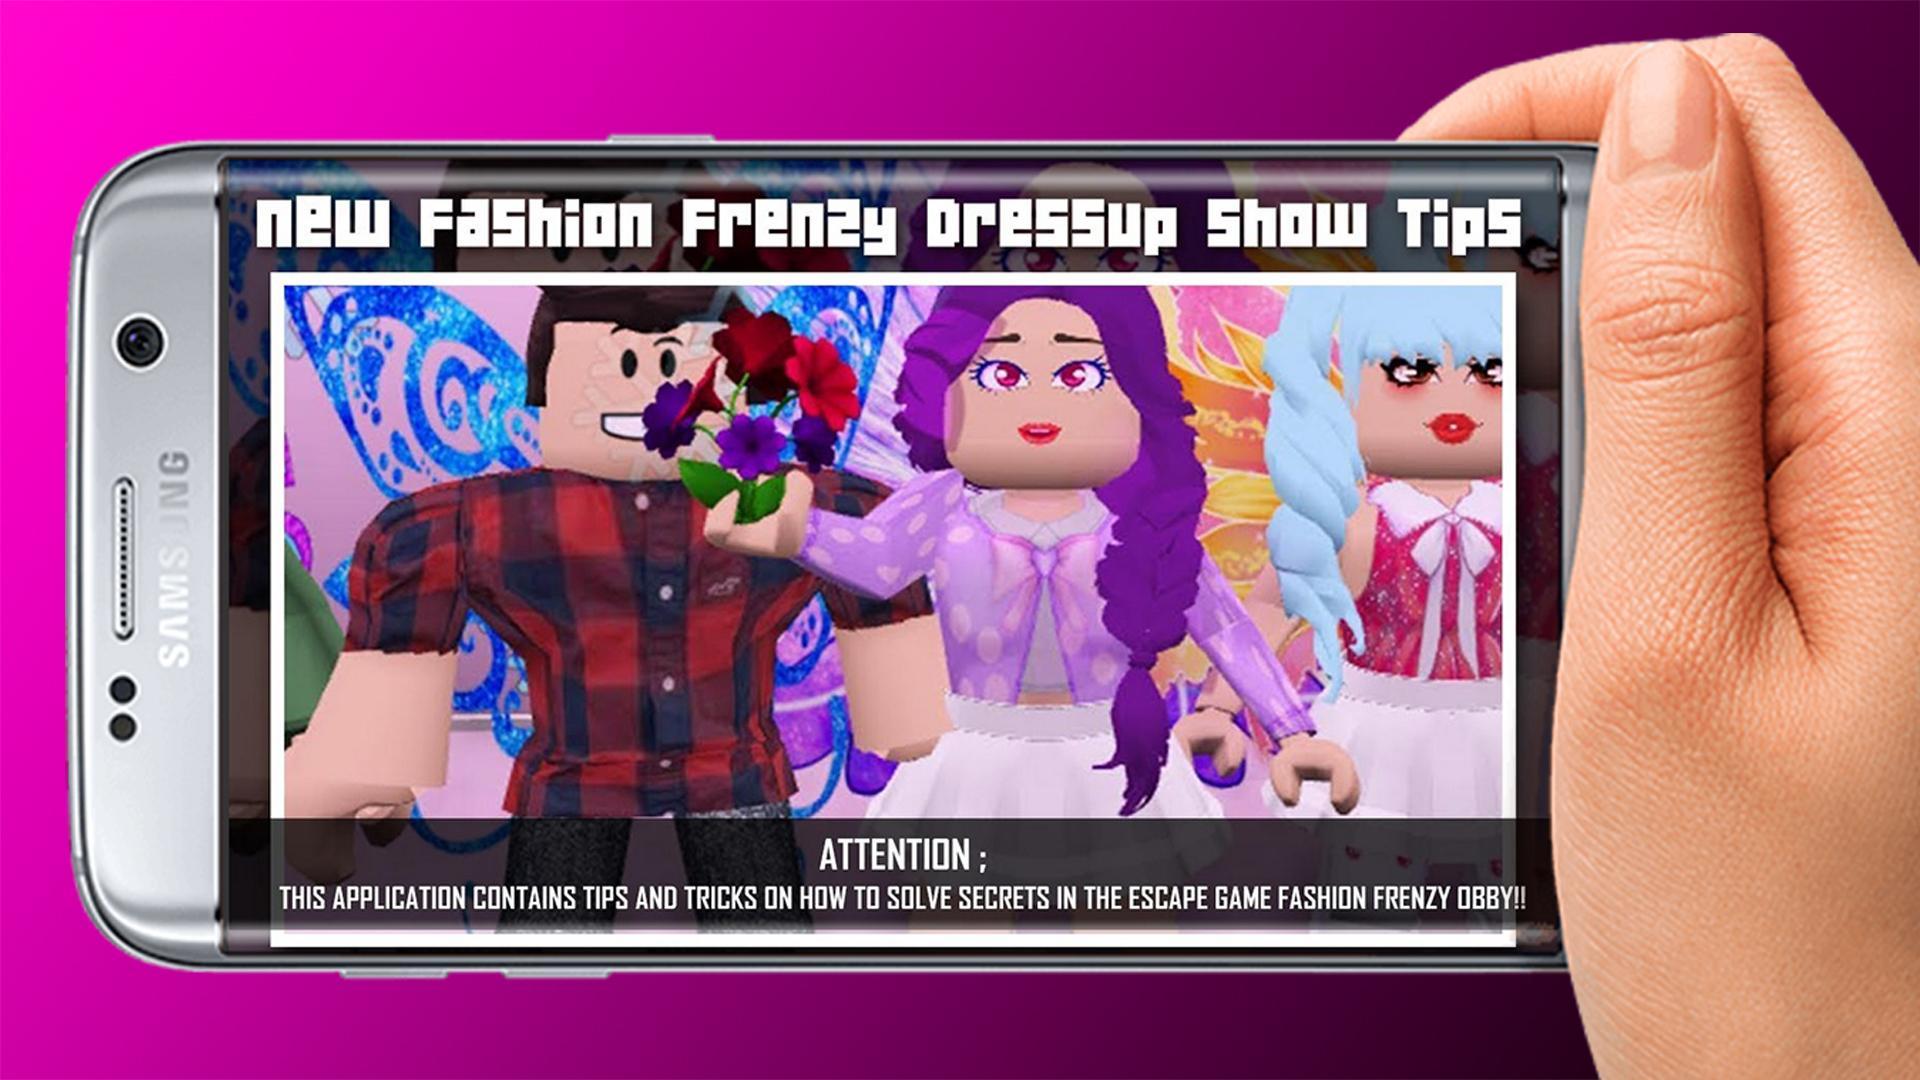 Guide For Fashion Show Frenzy Dress Up Obby Tips For Android - advice fashion frenzy dressup show roblox 10 apk